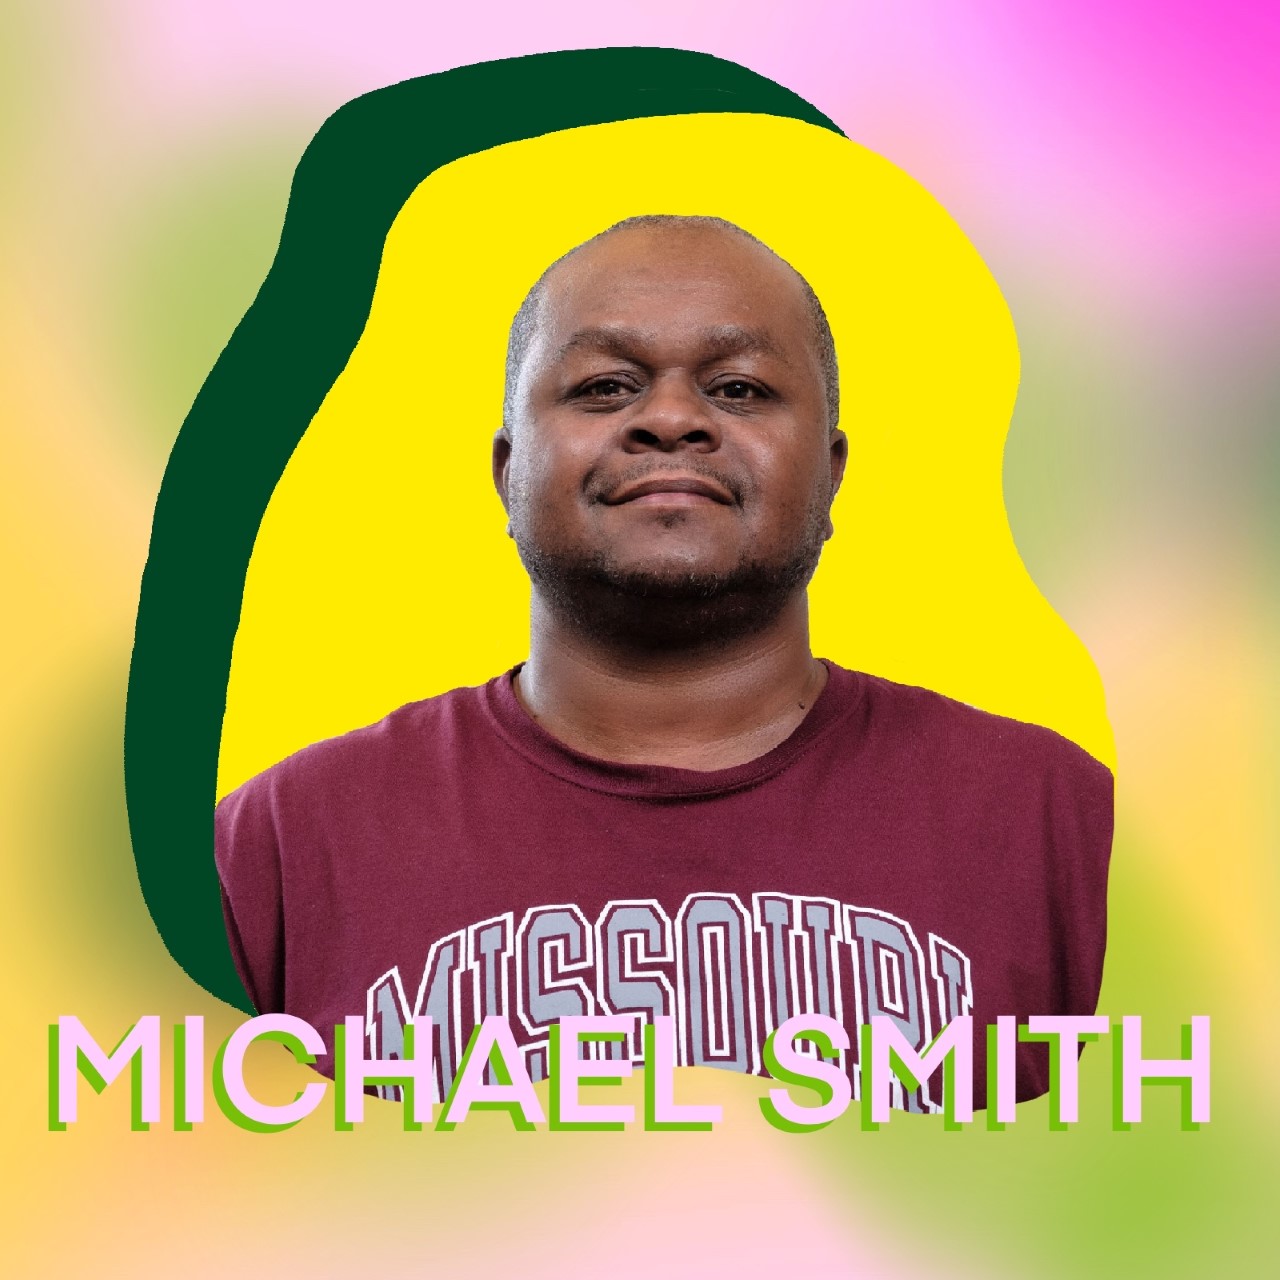 "Michael Smith" superimposed over his headshot